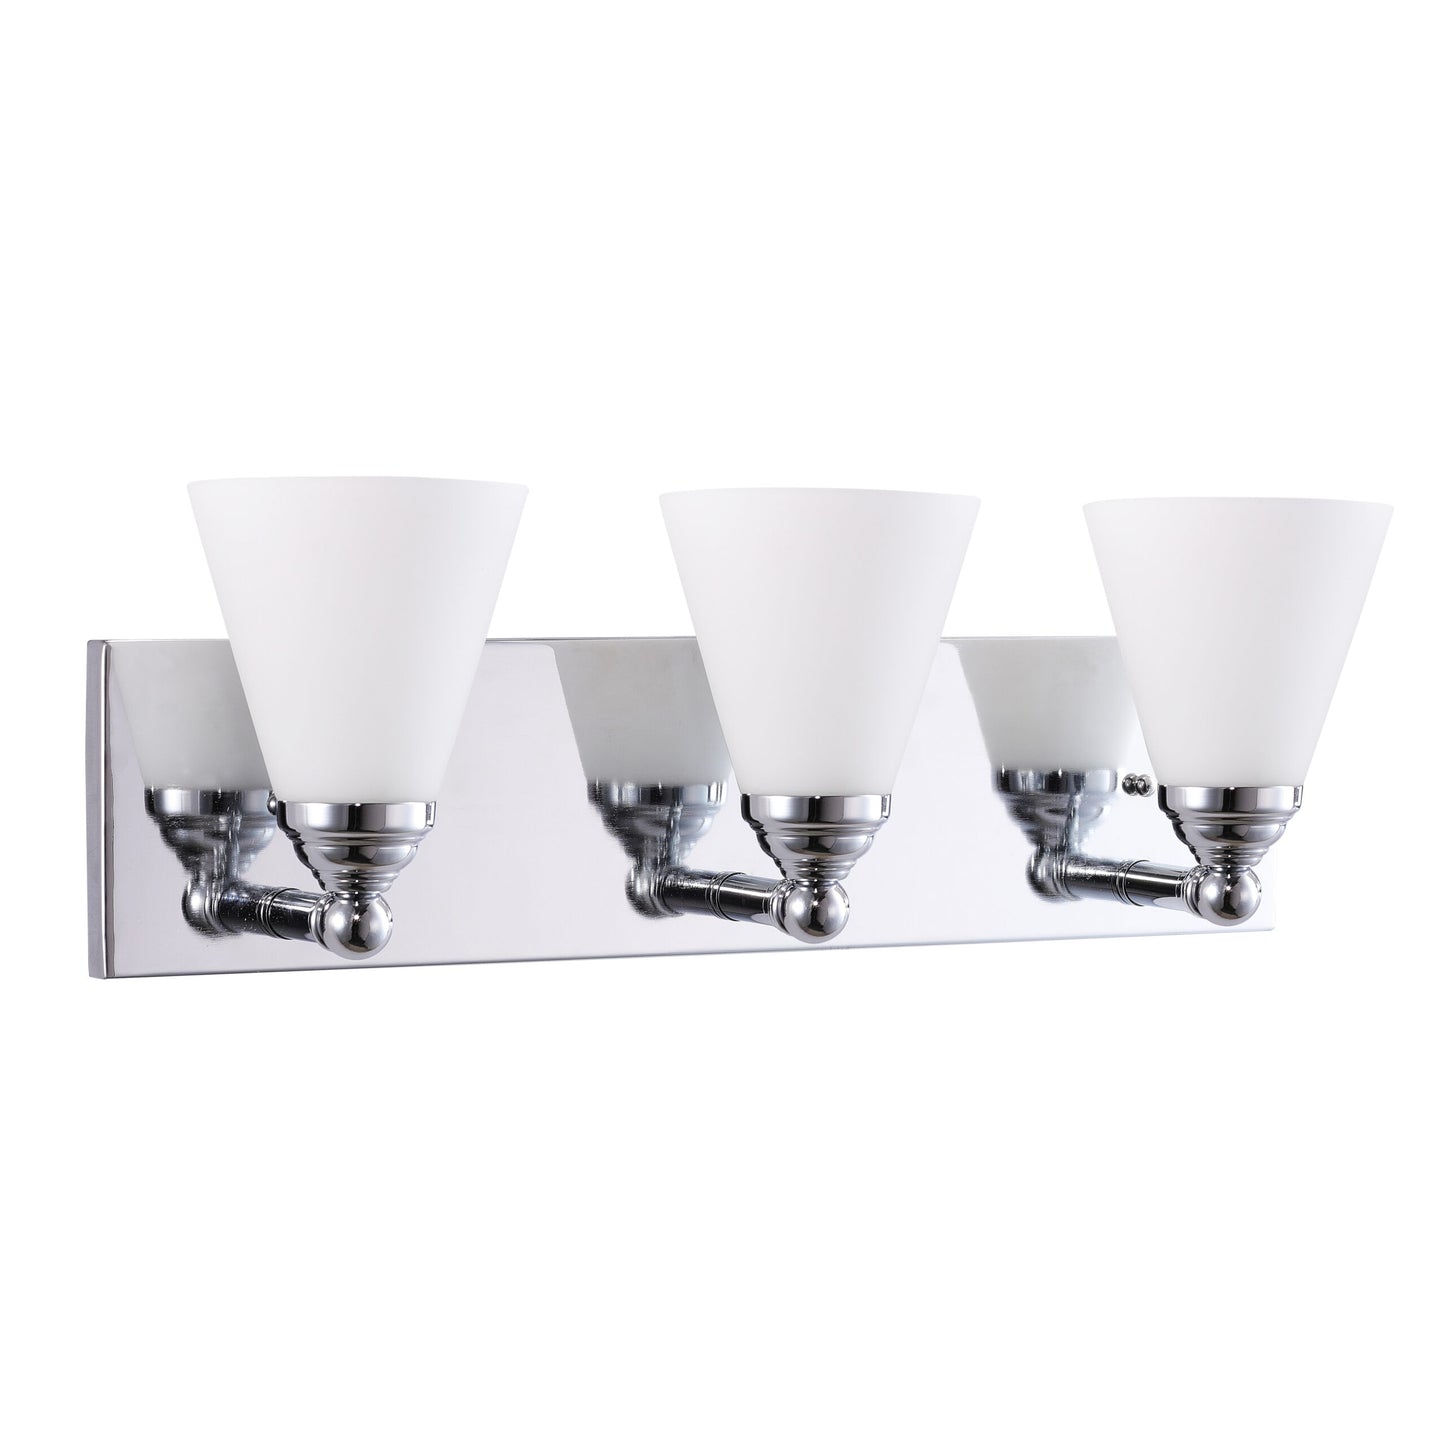 Sunlite - Cone Shade Vanity Light Fixture Frosted Glass Shade, Brushed Nickel Base 3-Lights